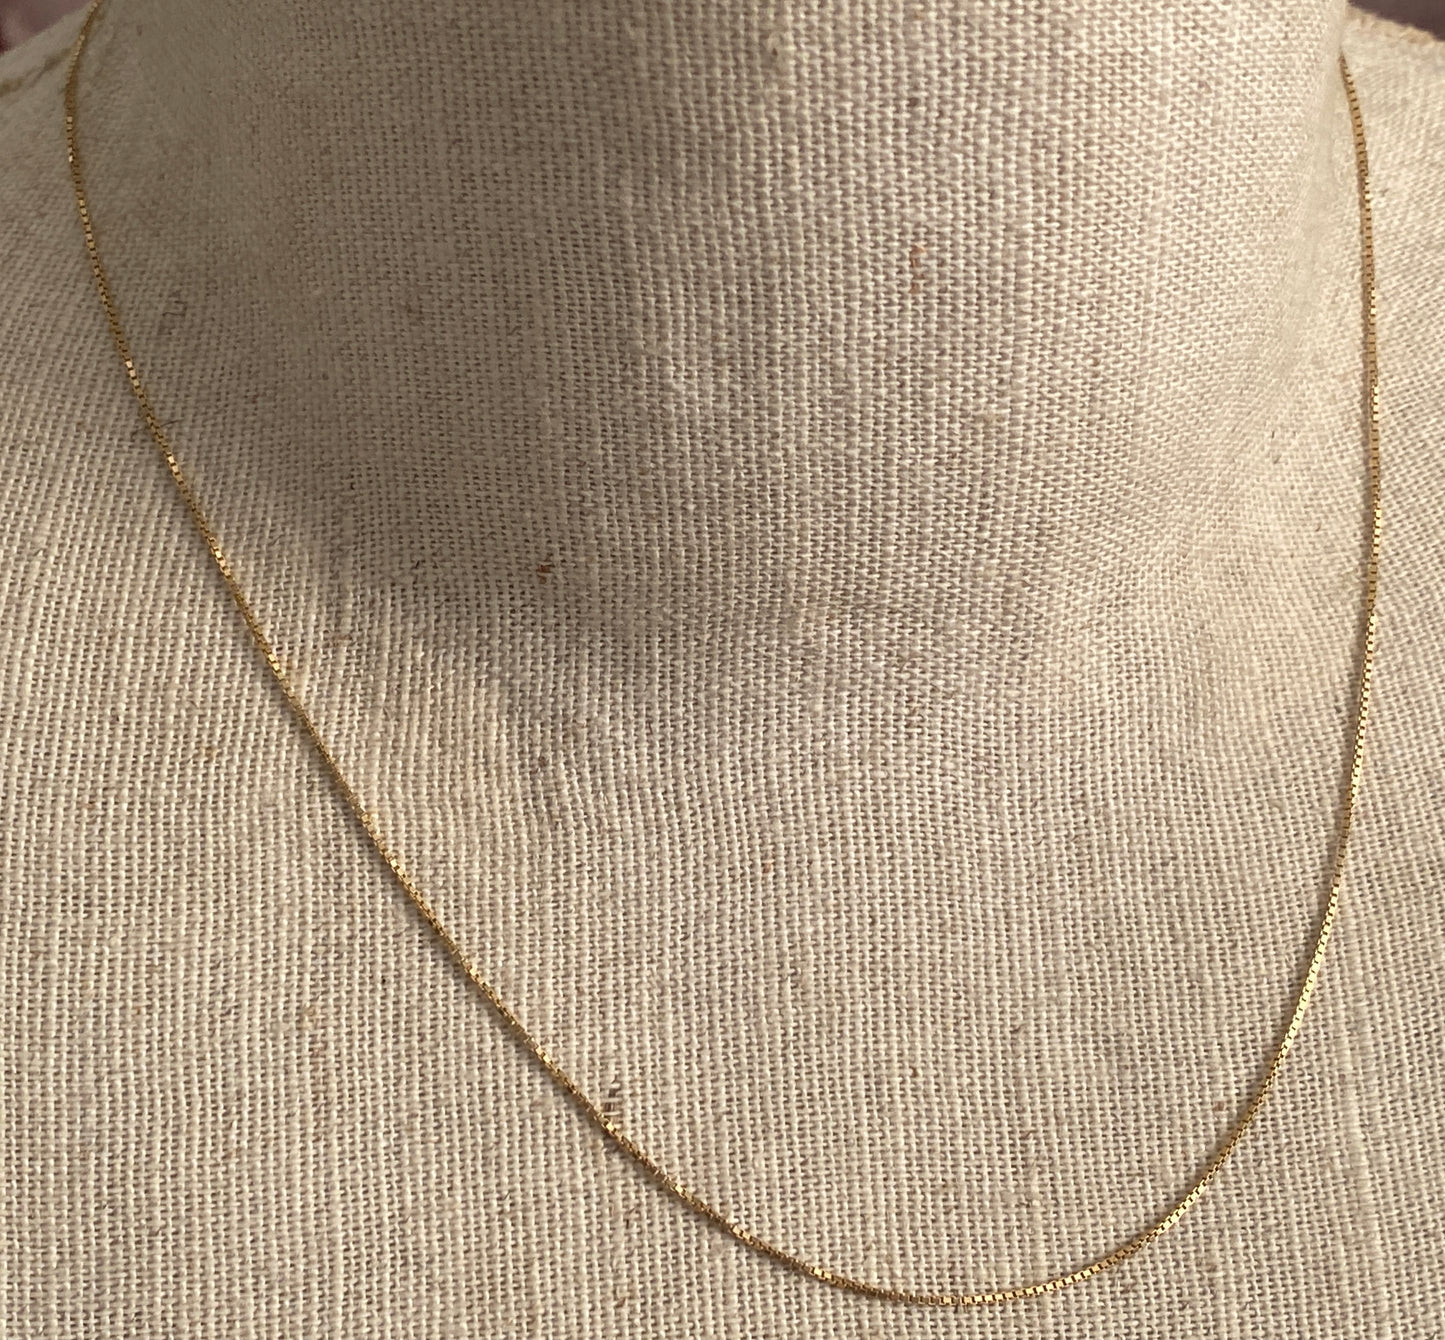 14k Yellow Gold Box Chain Necklace 18" Long x 1mm